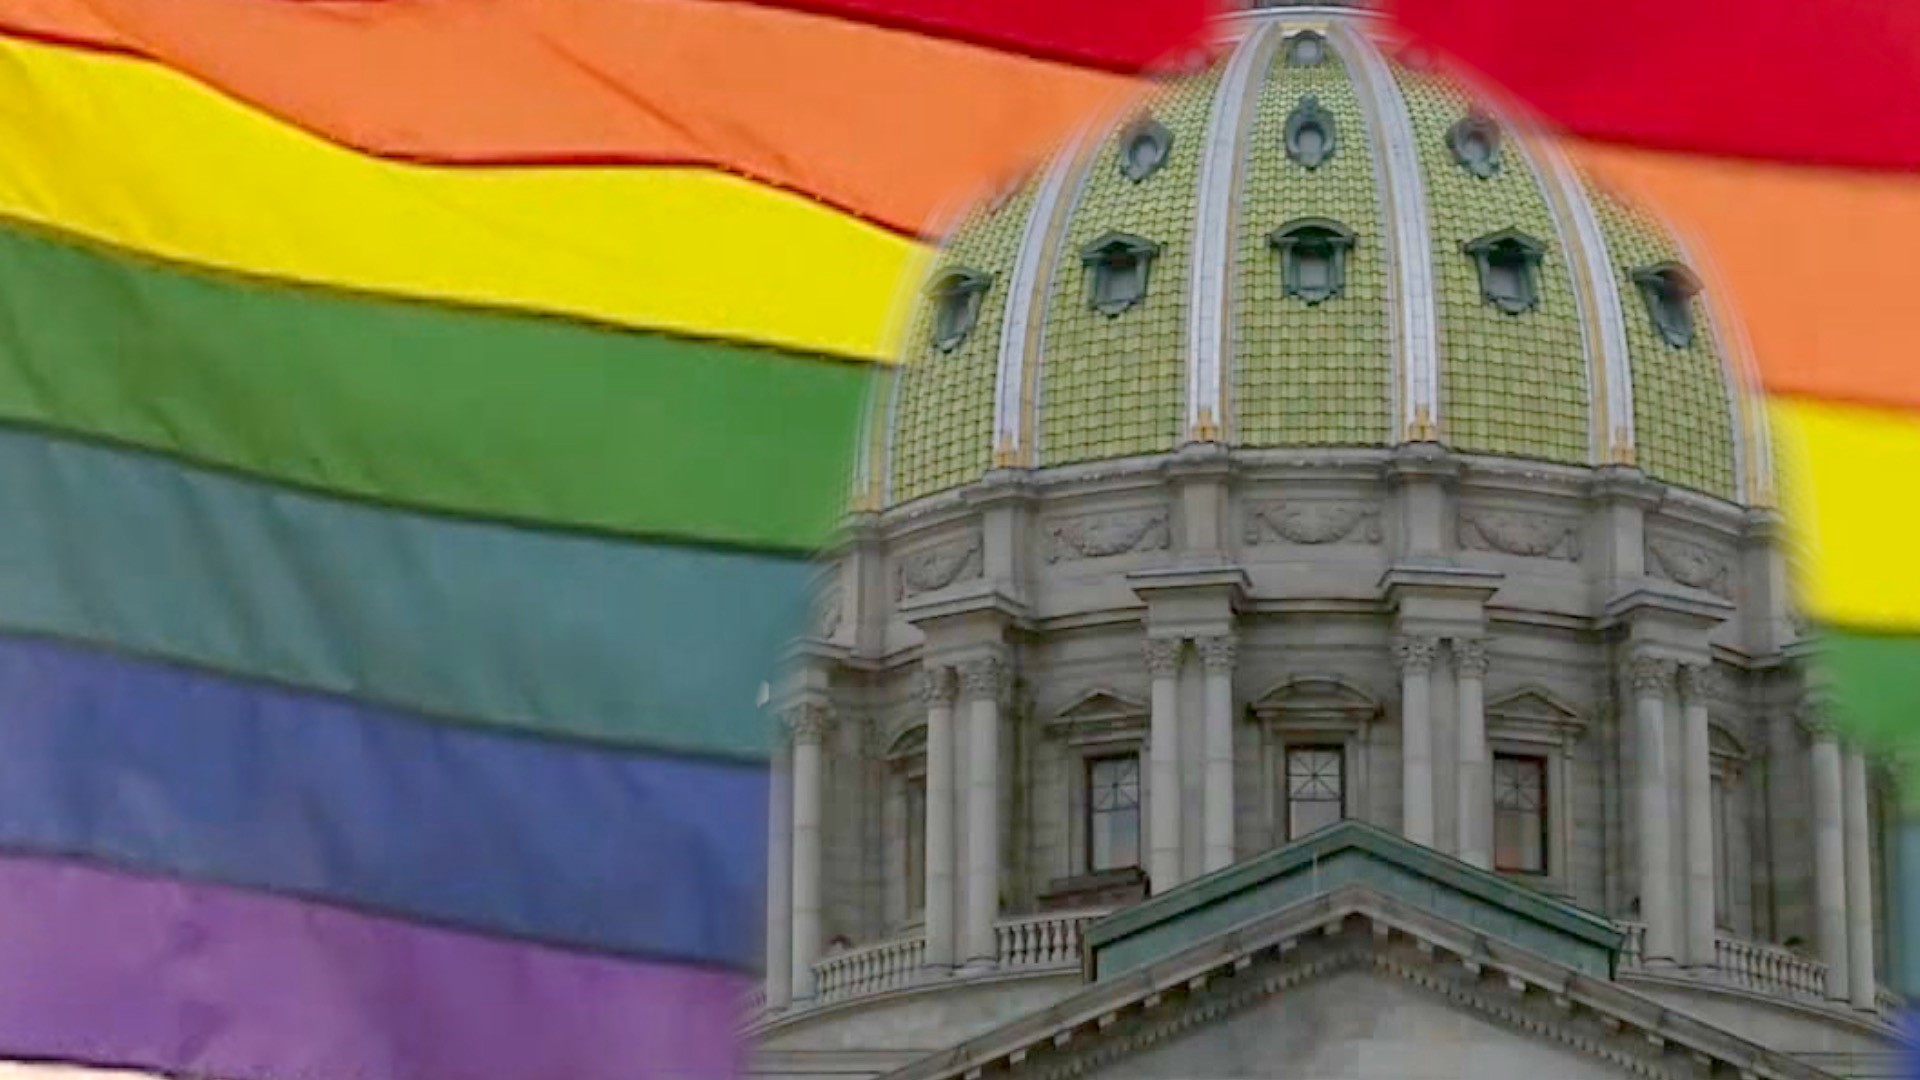 The PA Fairness Act would expand LGBTQ+ protections.